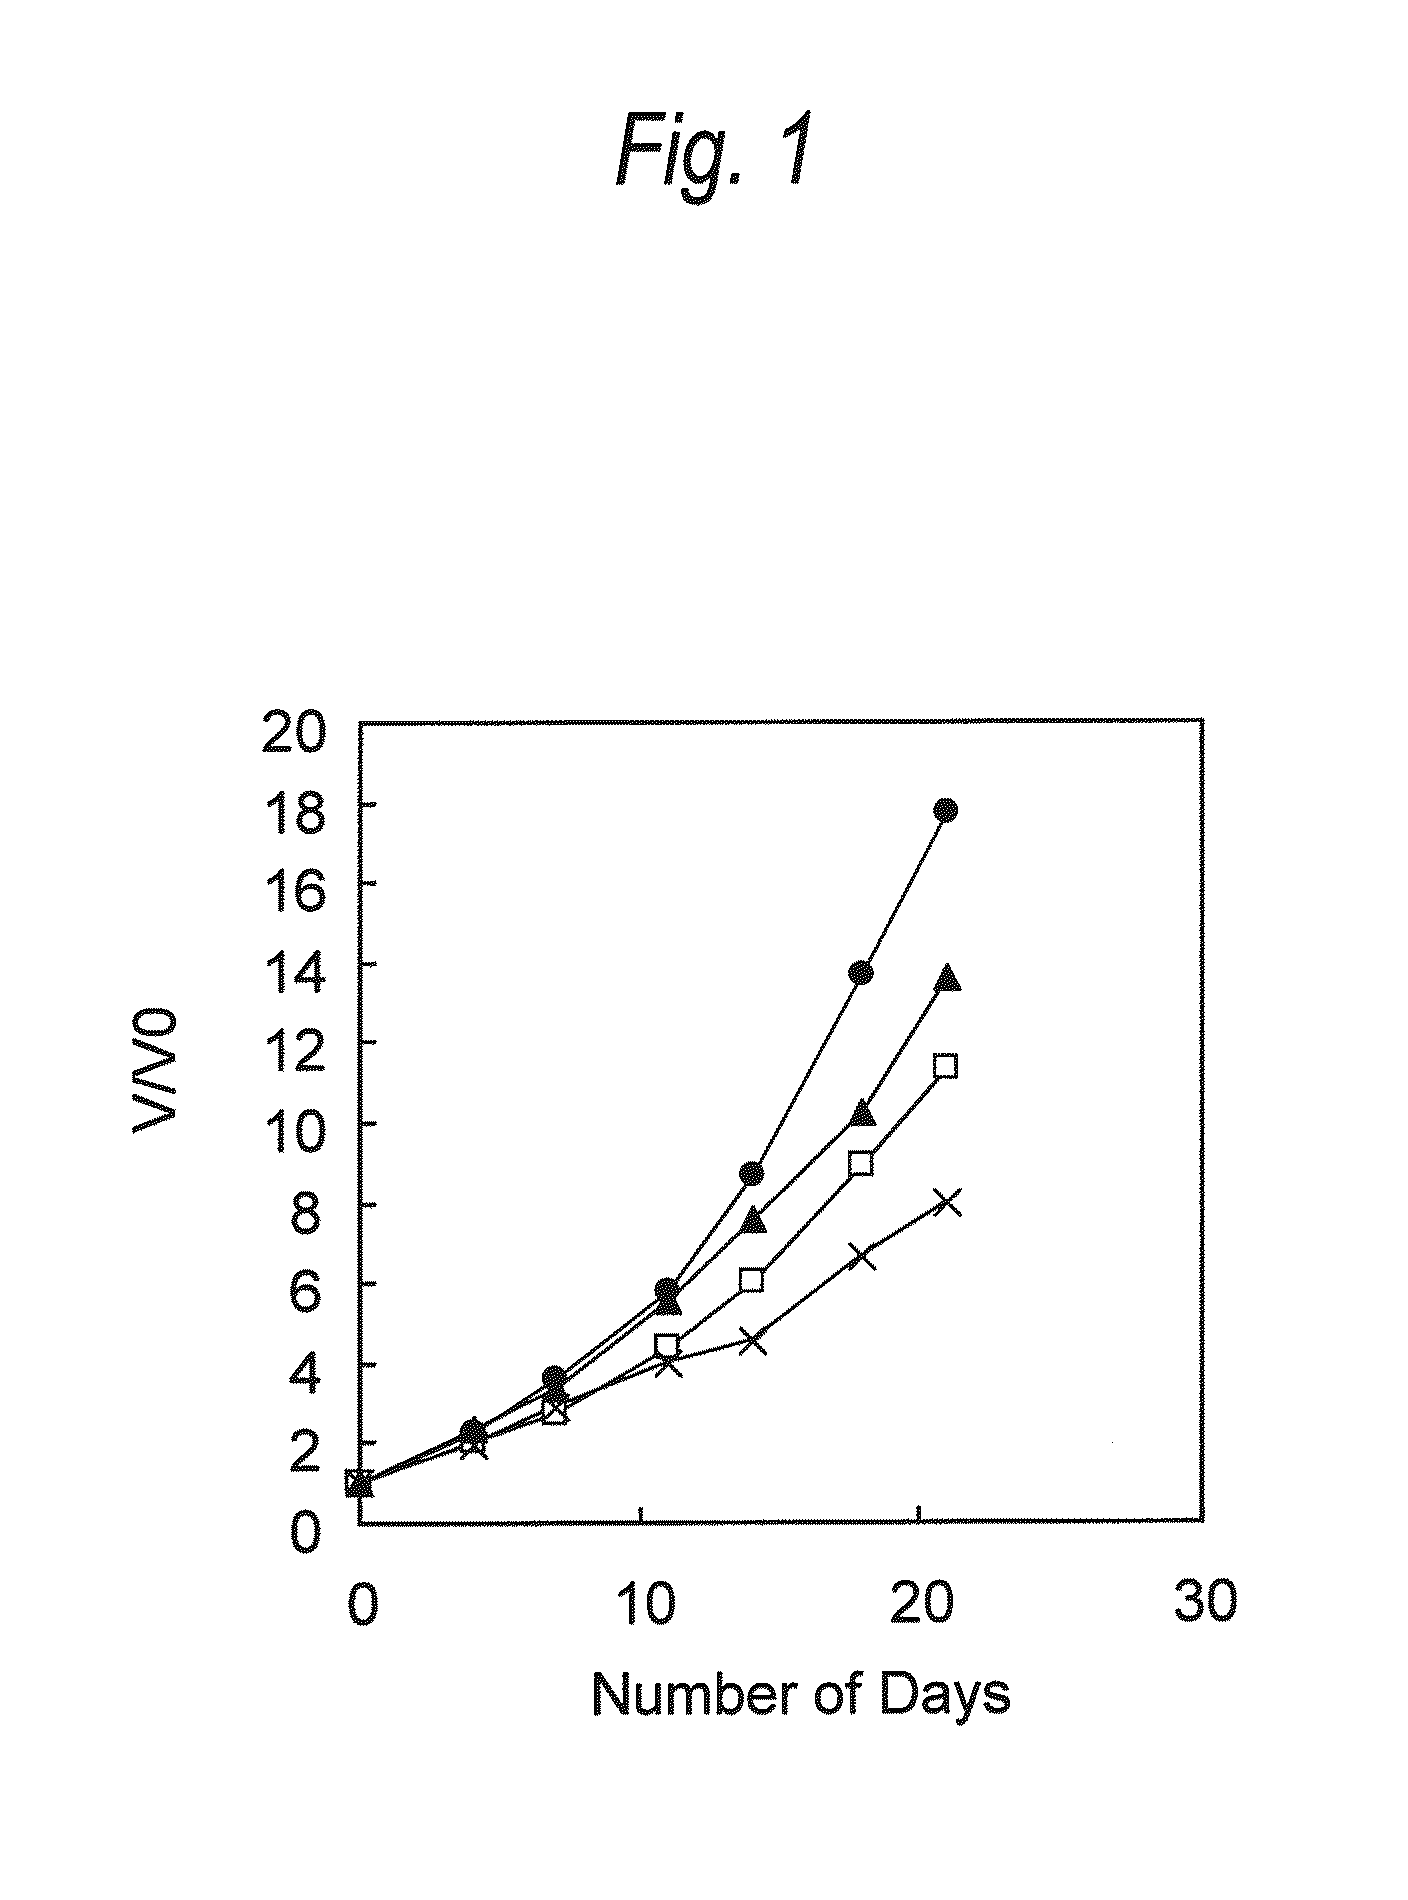 Pharmaceutical composition comprising antibody composition which specifically binds to ccr4